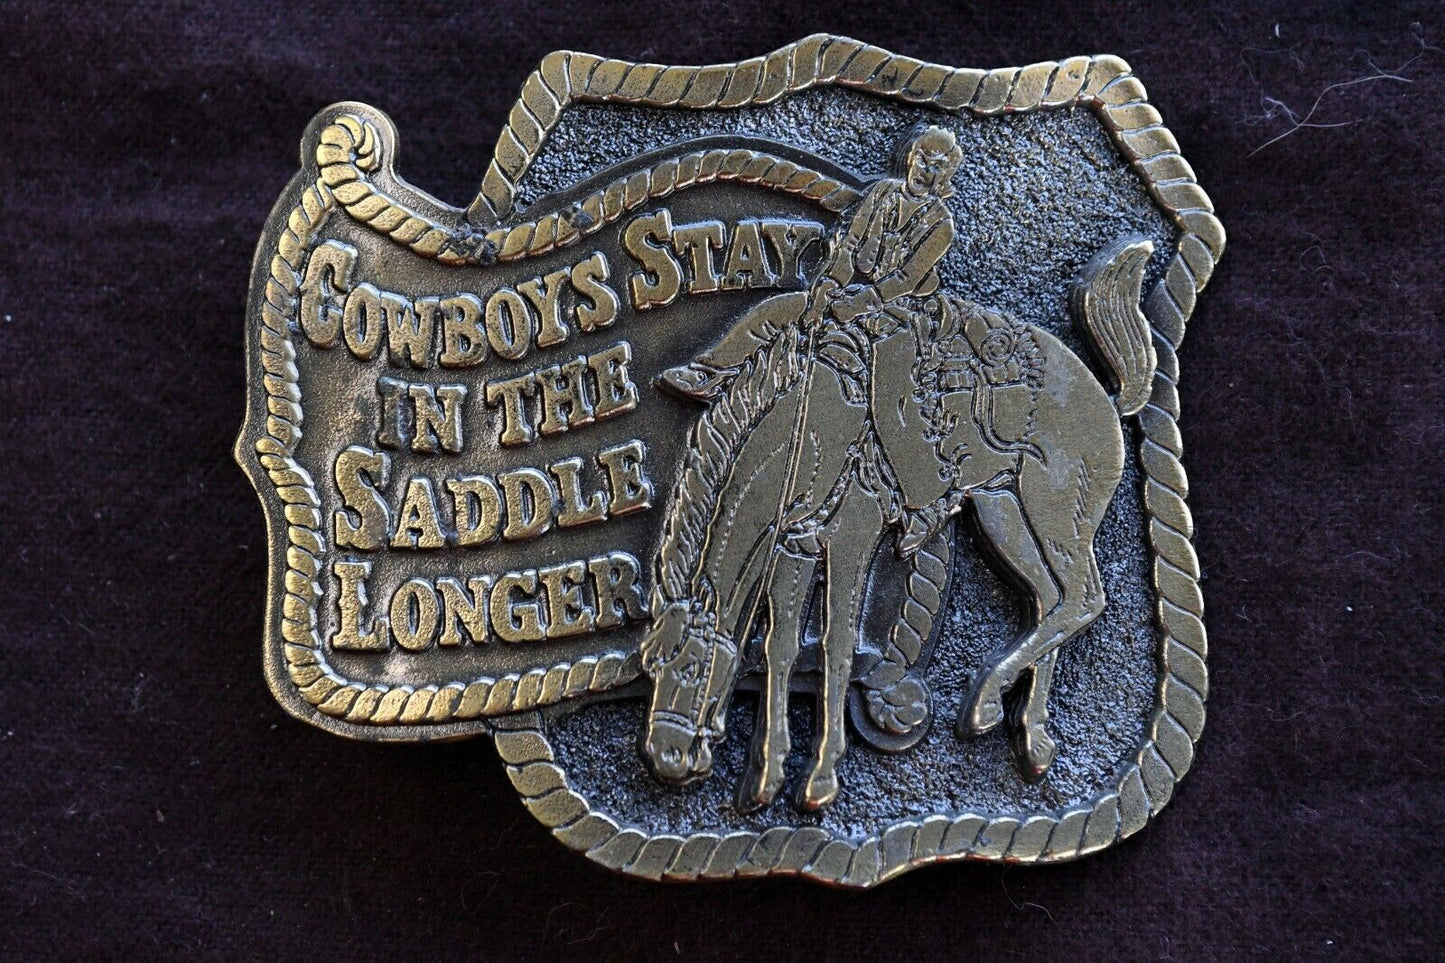 1980 Cowboys Stay in the Saddle Longer 3 3/4" x  2 3/4" Brass Belt Buckle 5.8 oz